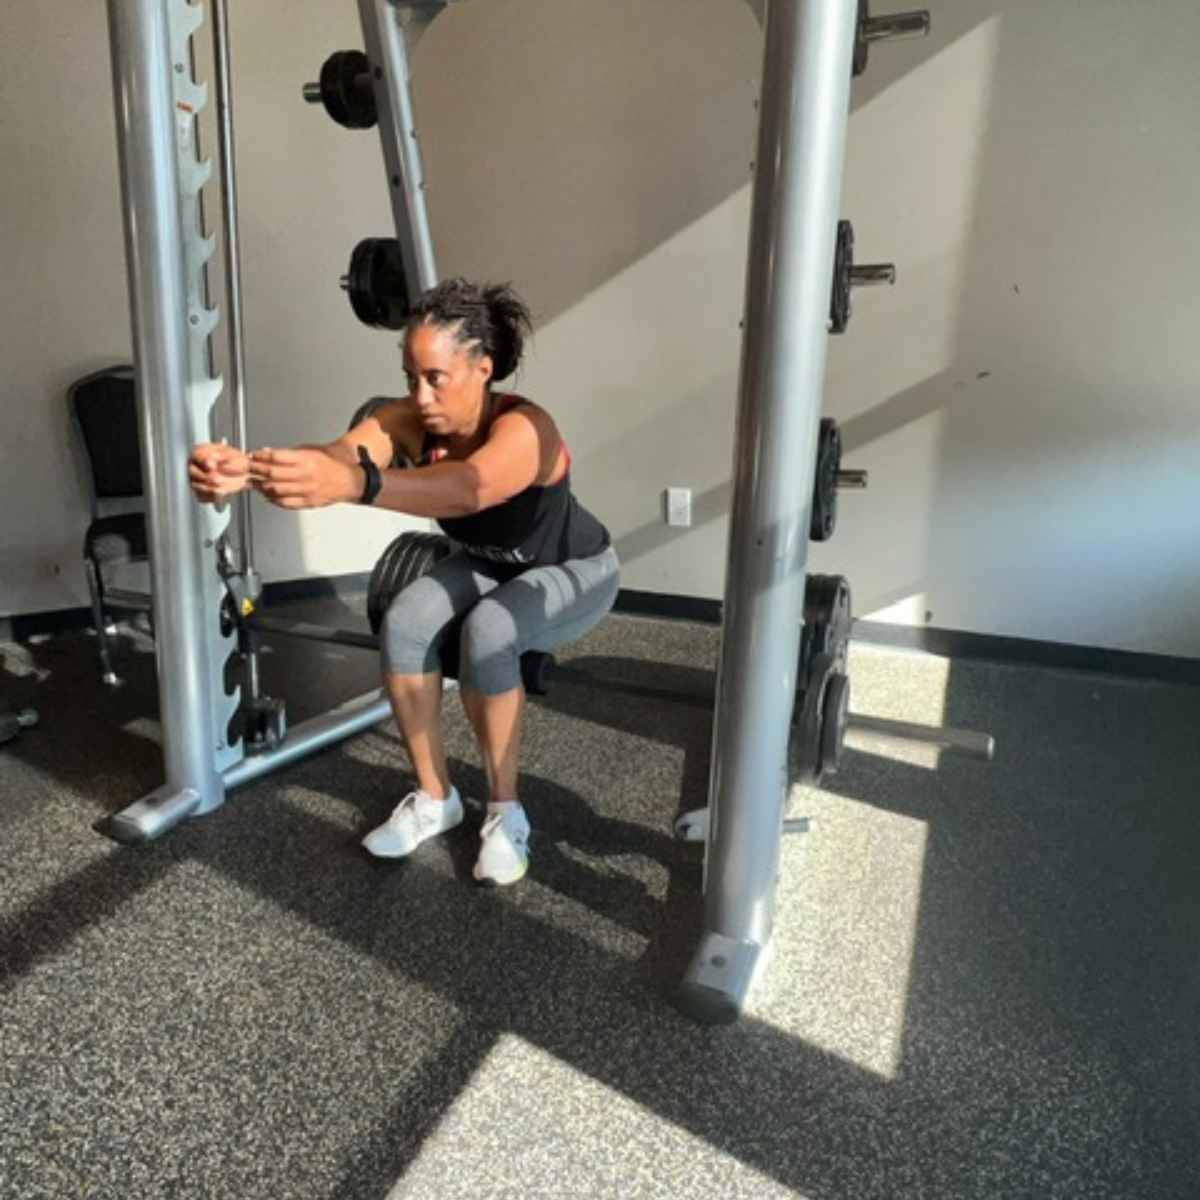 Sculpt strong legs with Smith machine leg exercises